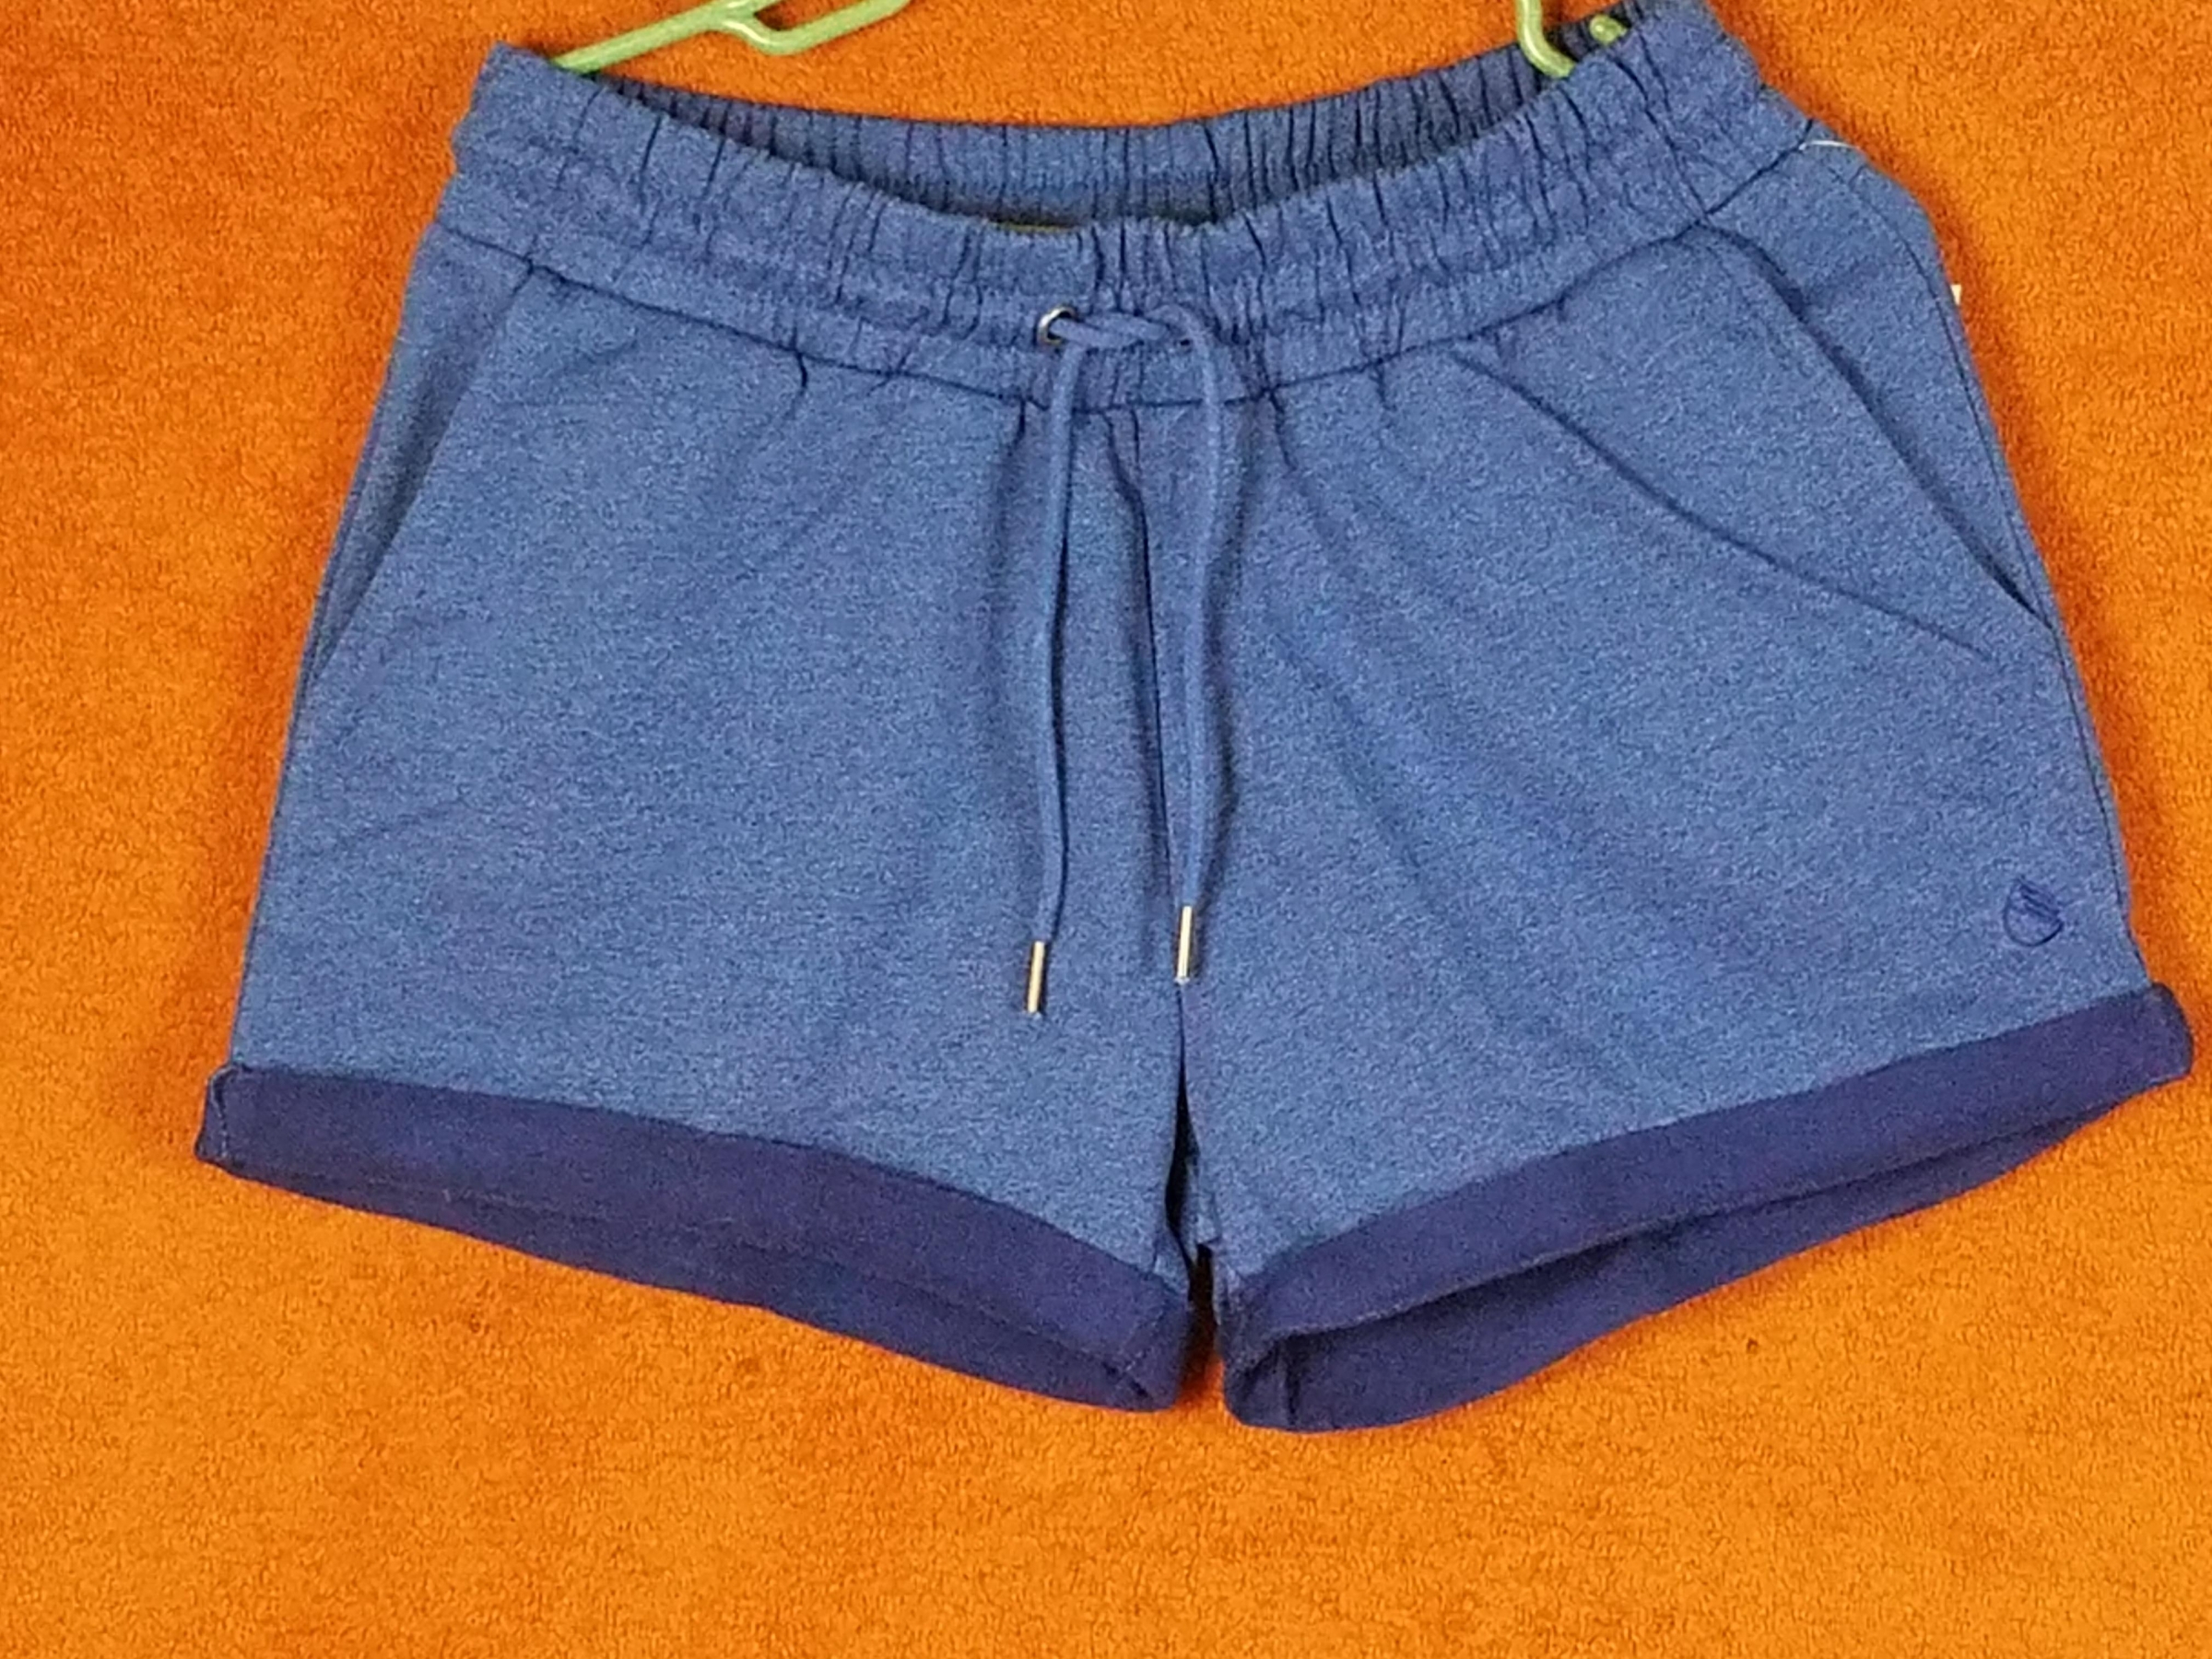 Comfortable, cute, fashionable & feminine!  These shorts add style & class to your work out, jog, etc. & feature a drawstring for a more custom fit.